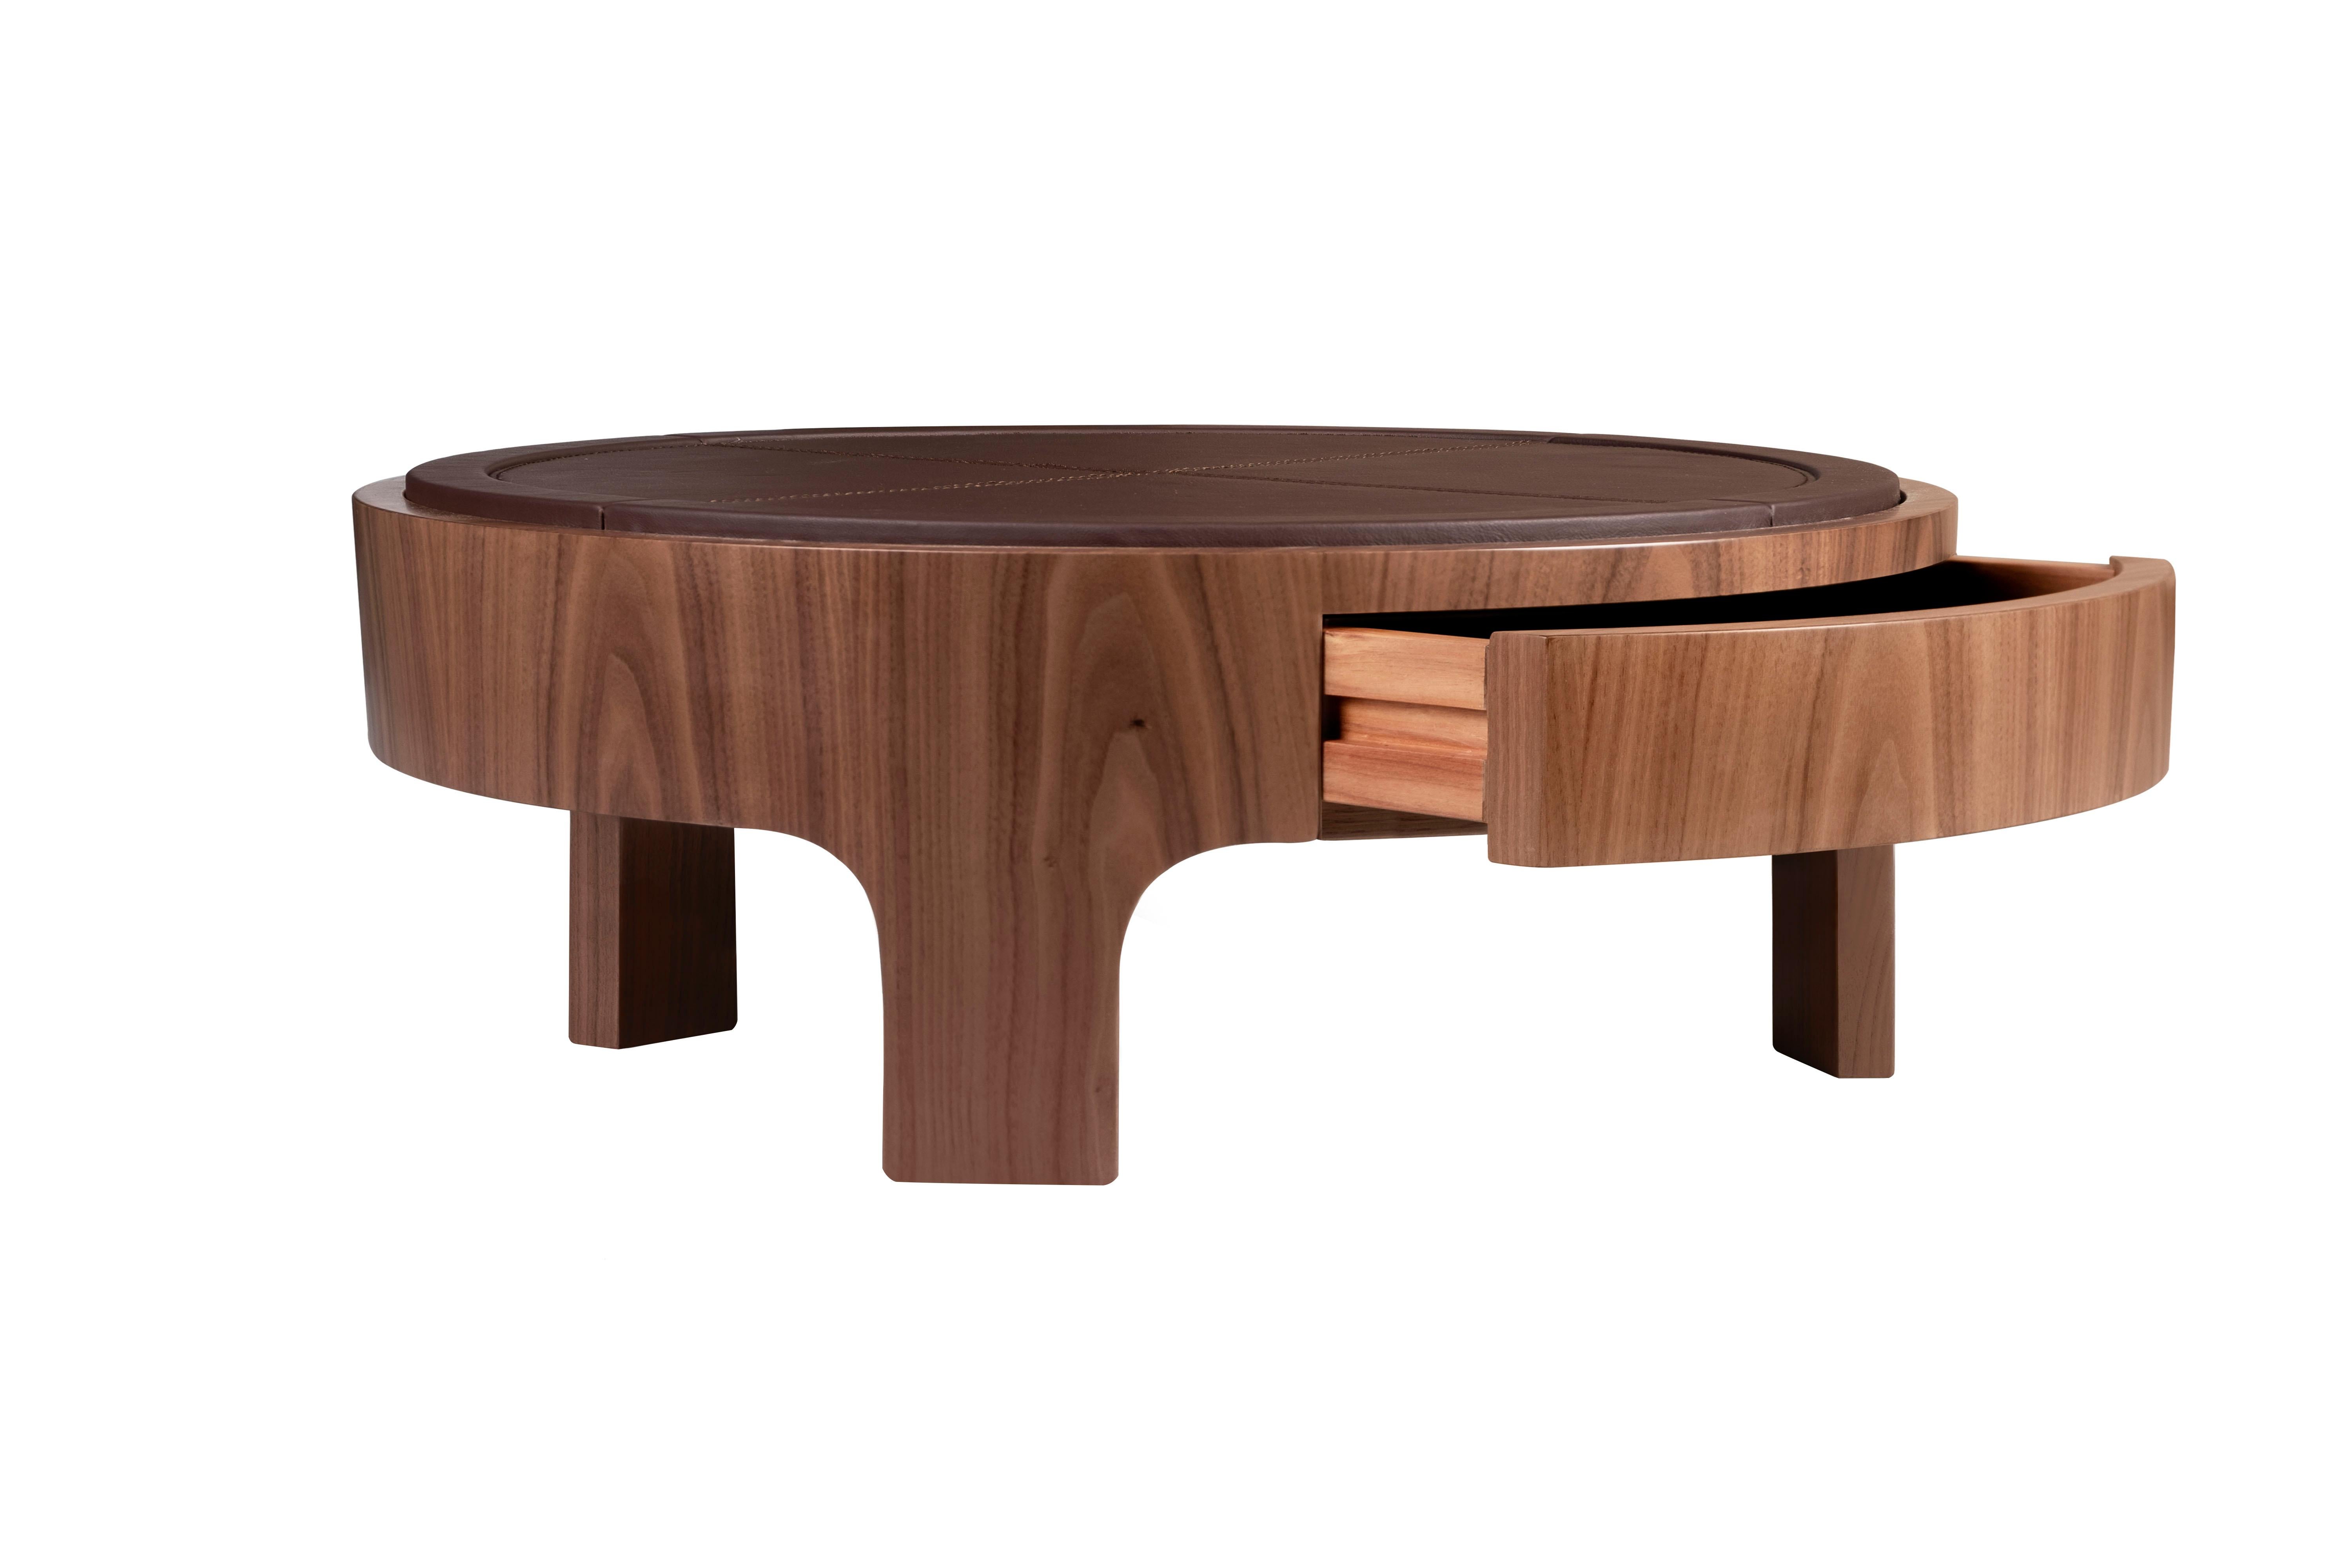 Churchill Center Table has a distinctive, imponent yet modest look, and it’s meticulously handmade with the rigorously selected material, allying the best in modern design and traditional craftsmanship. This three-legged center table features a